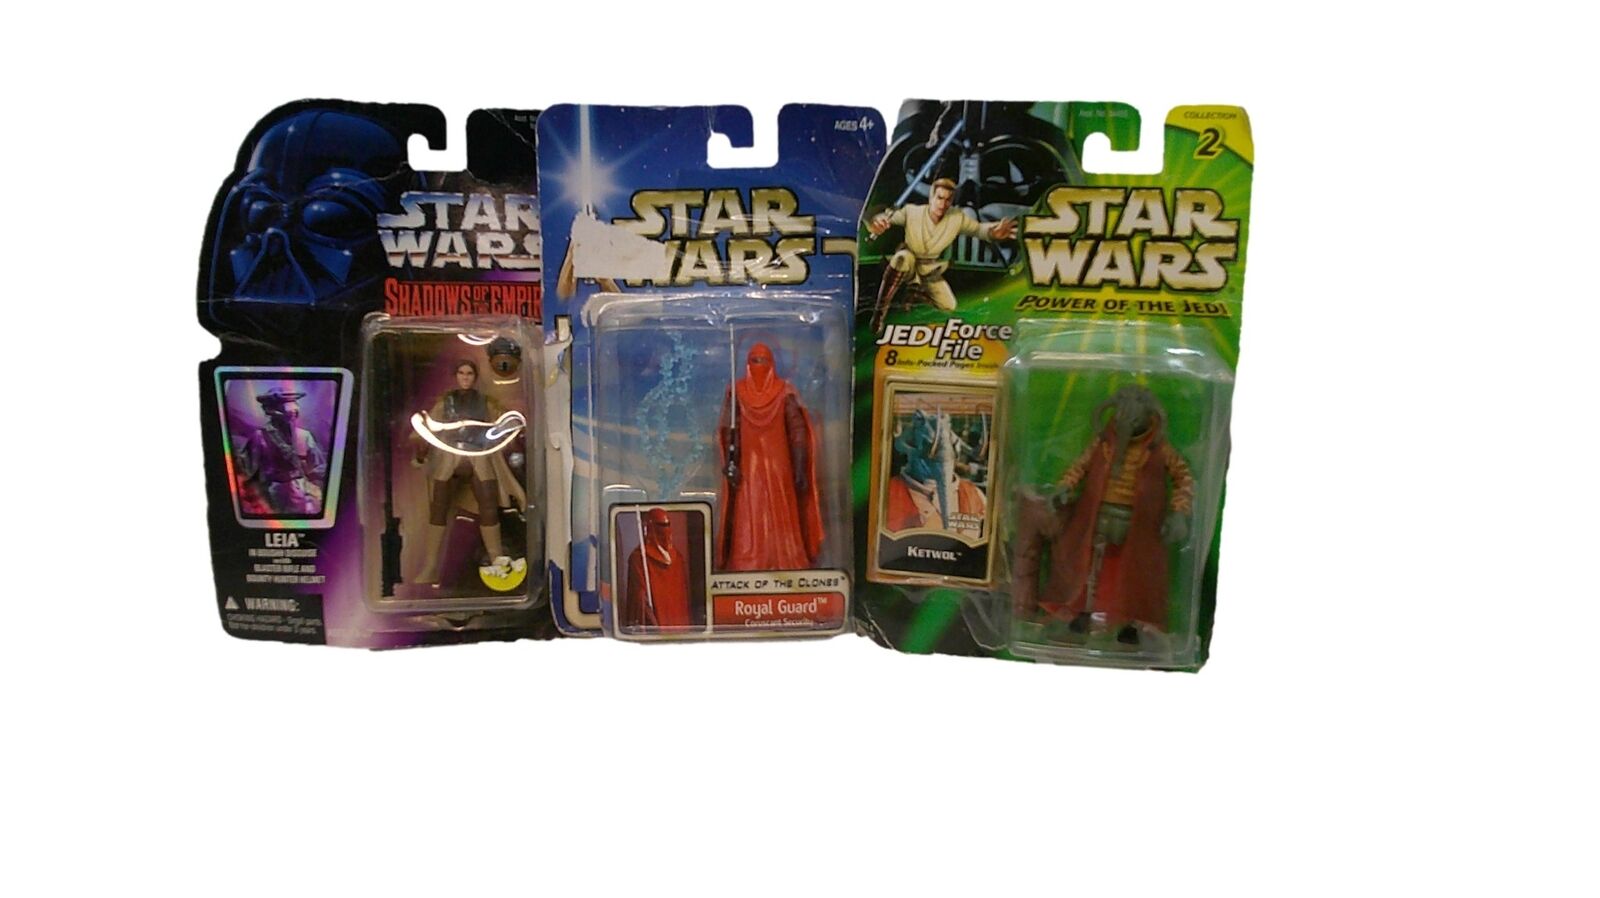 Star Wars Collective Vintage Action Figures New In Box 3 Items In Lot